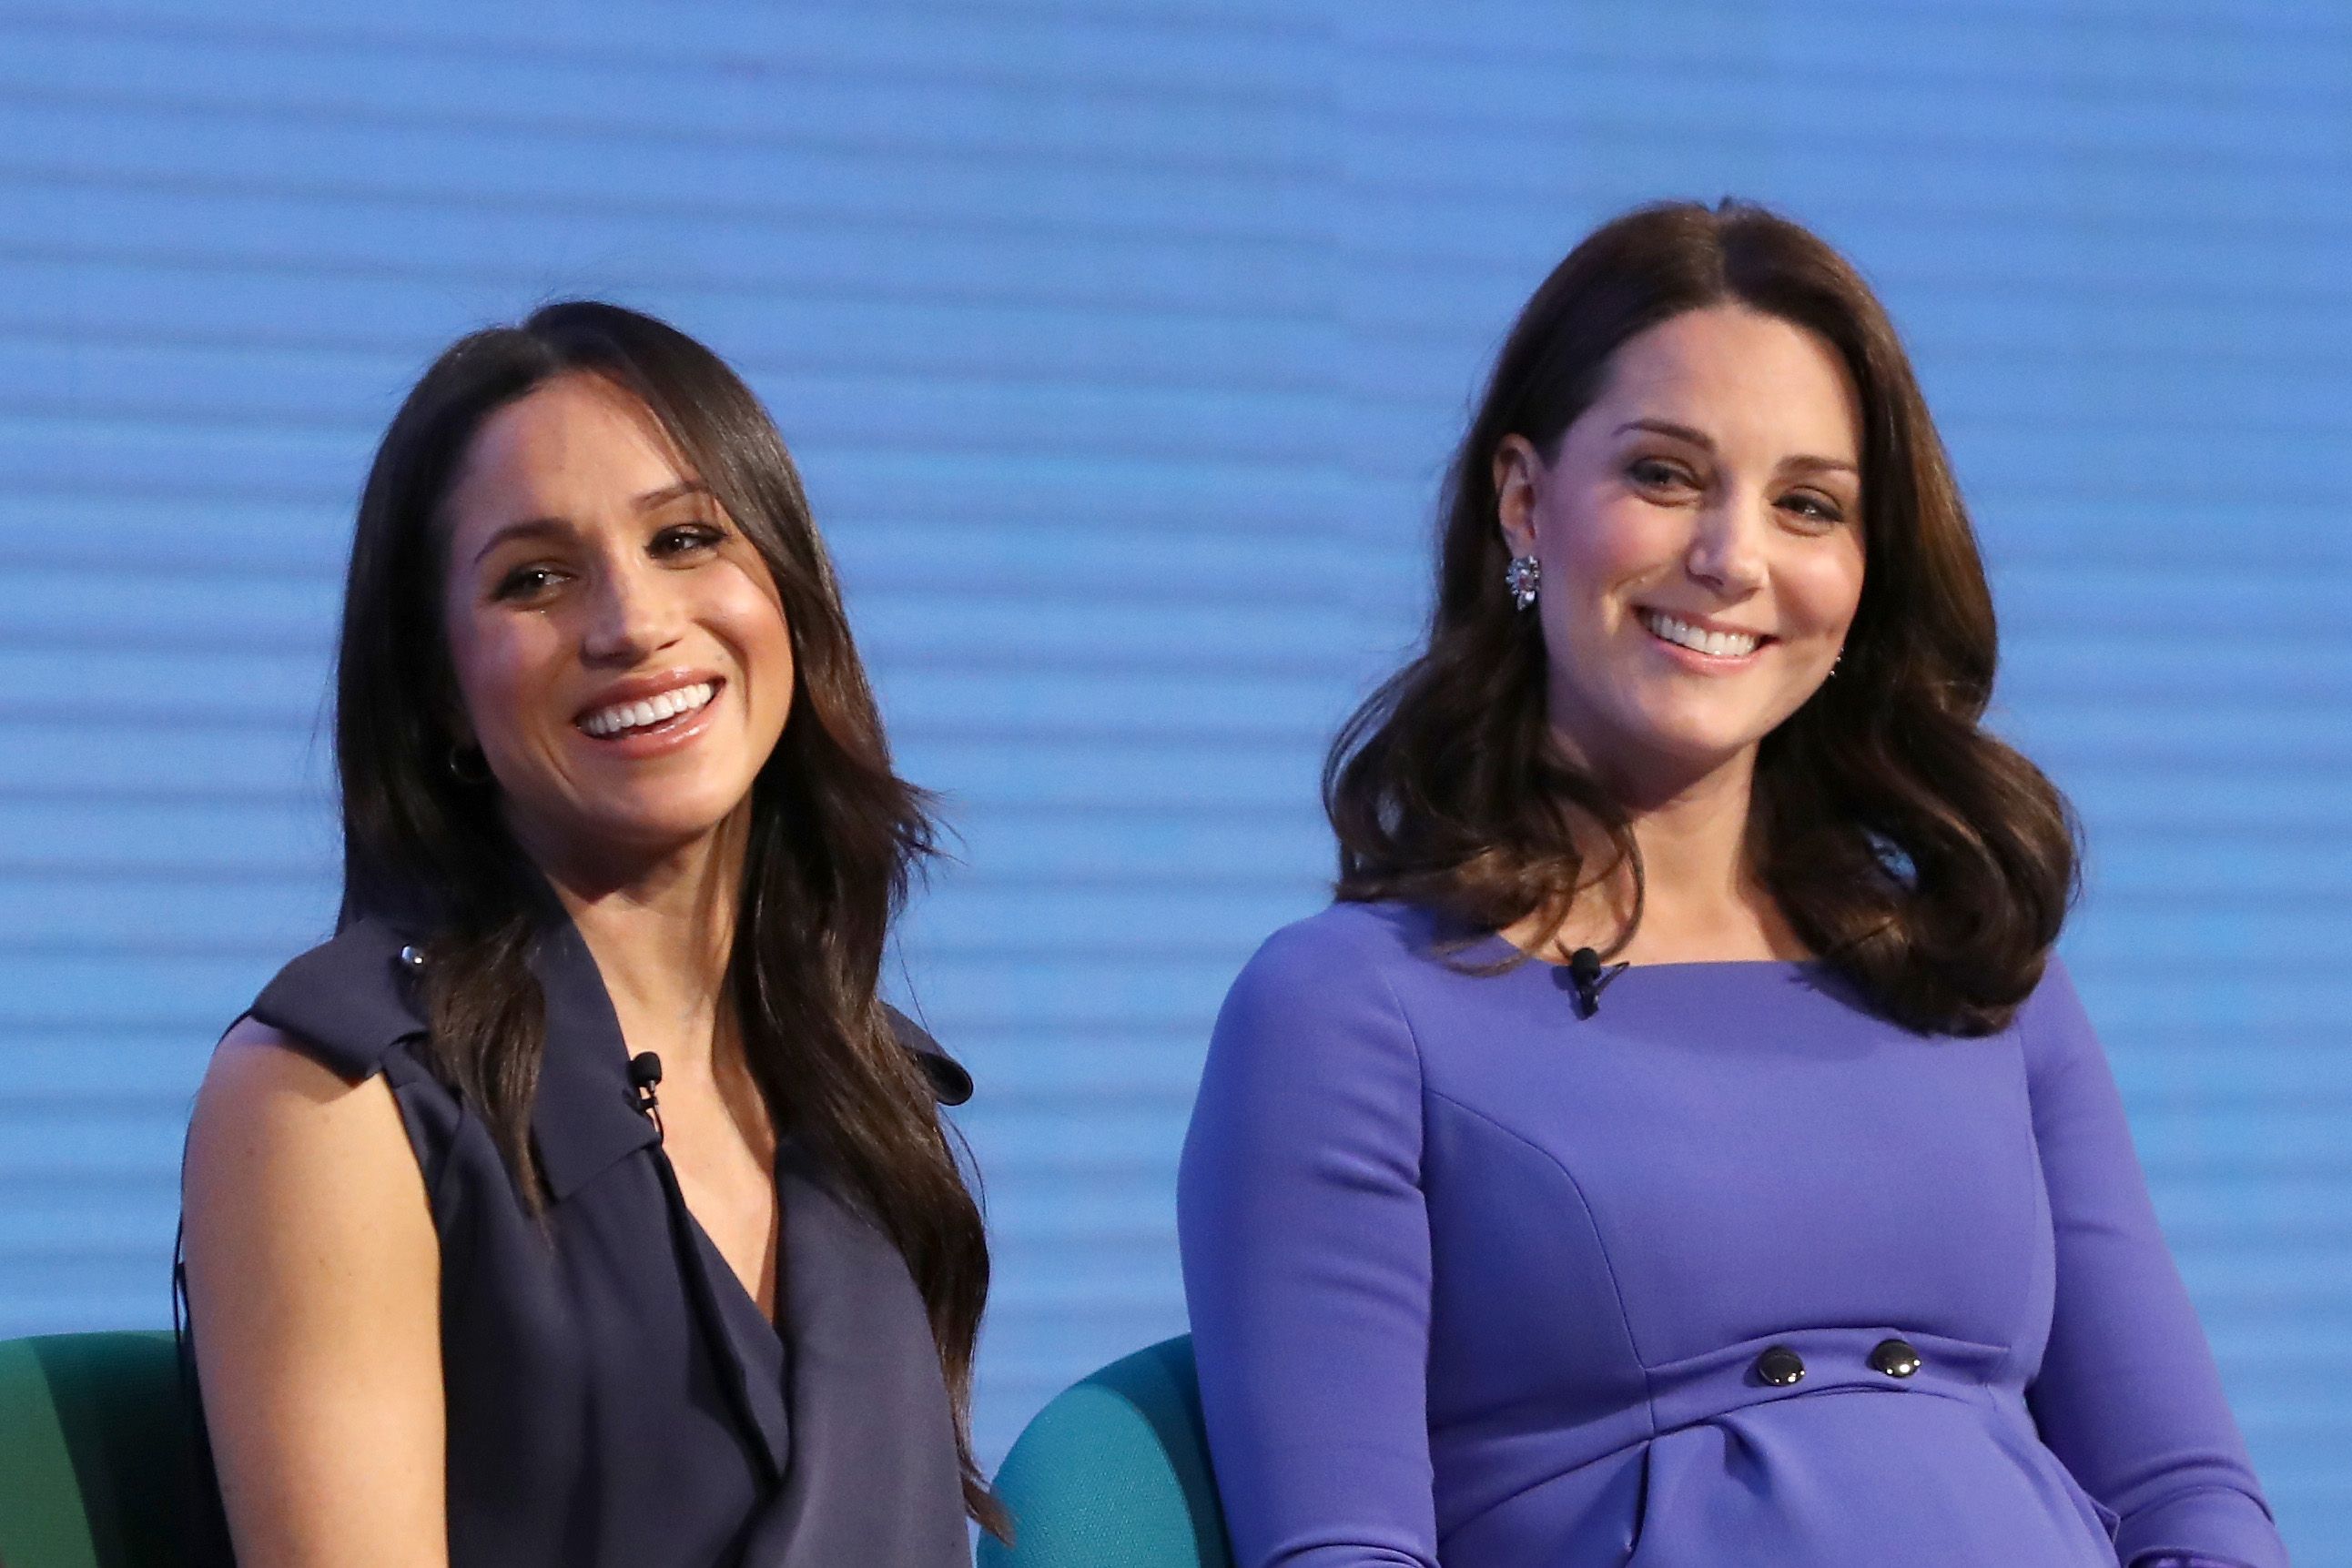 Meghan Markle and Kate Middleton Friendship Through the Years